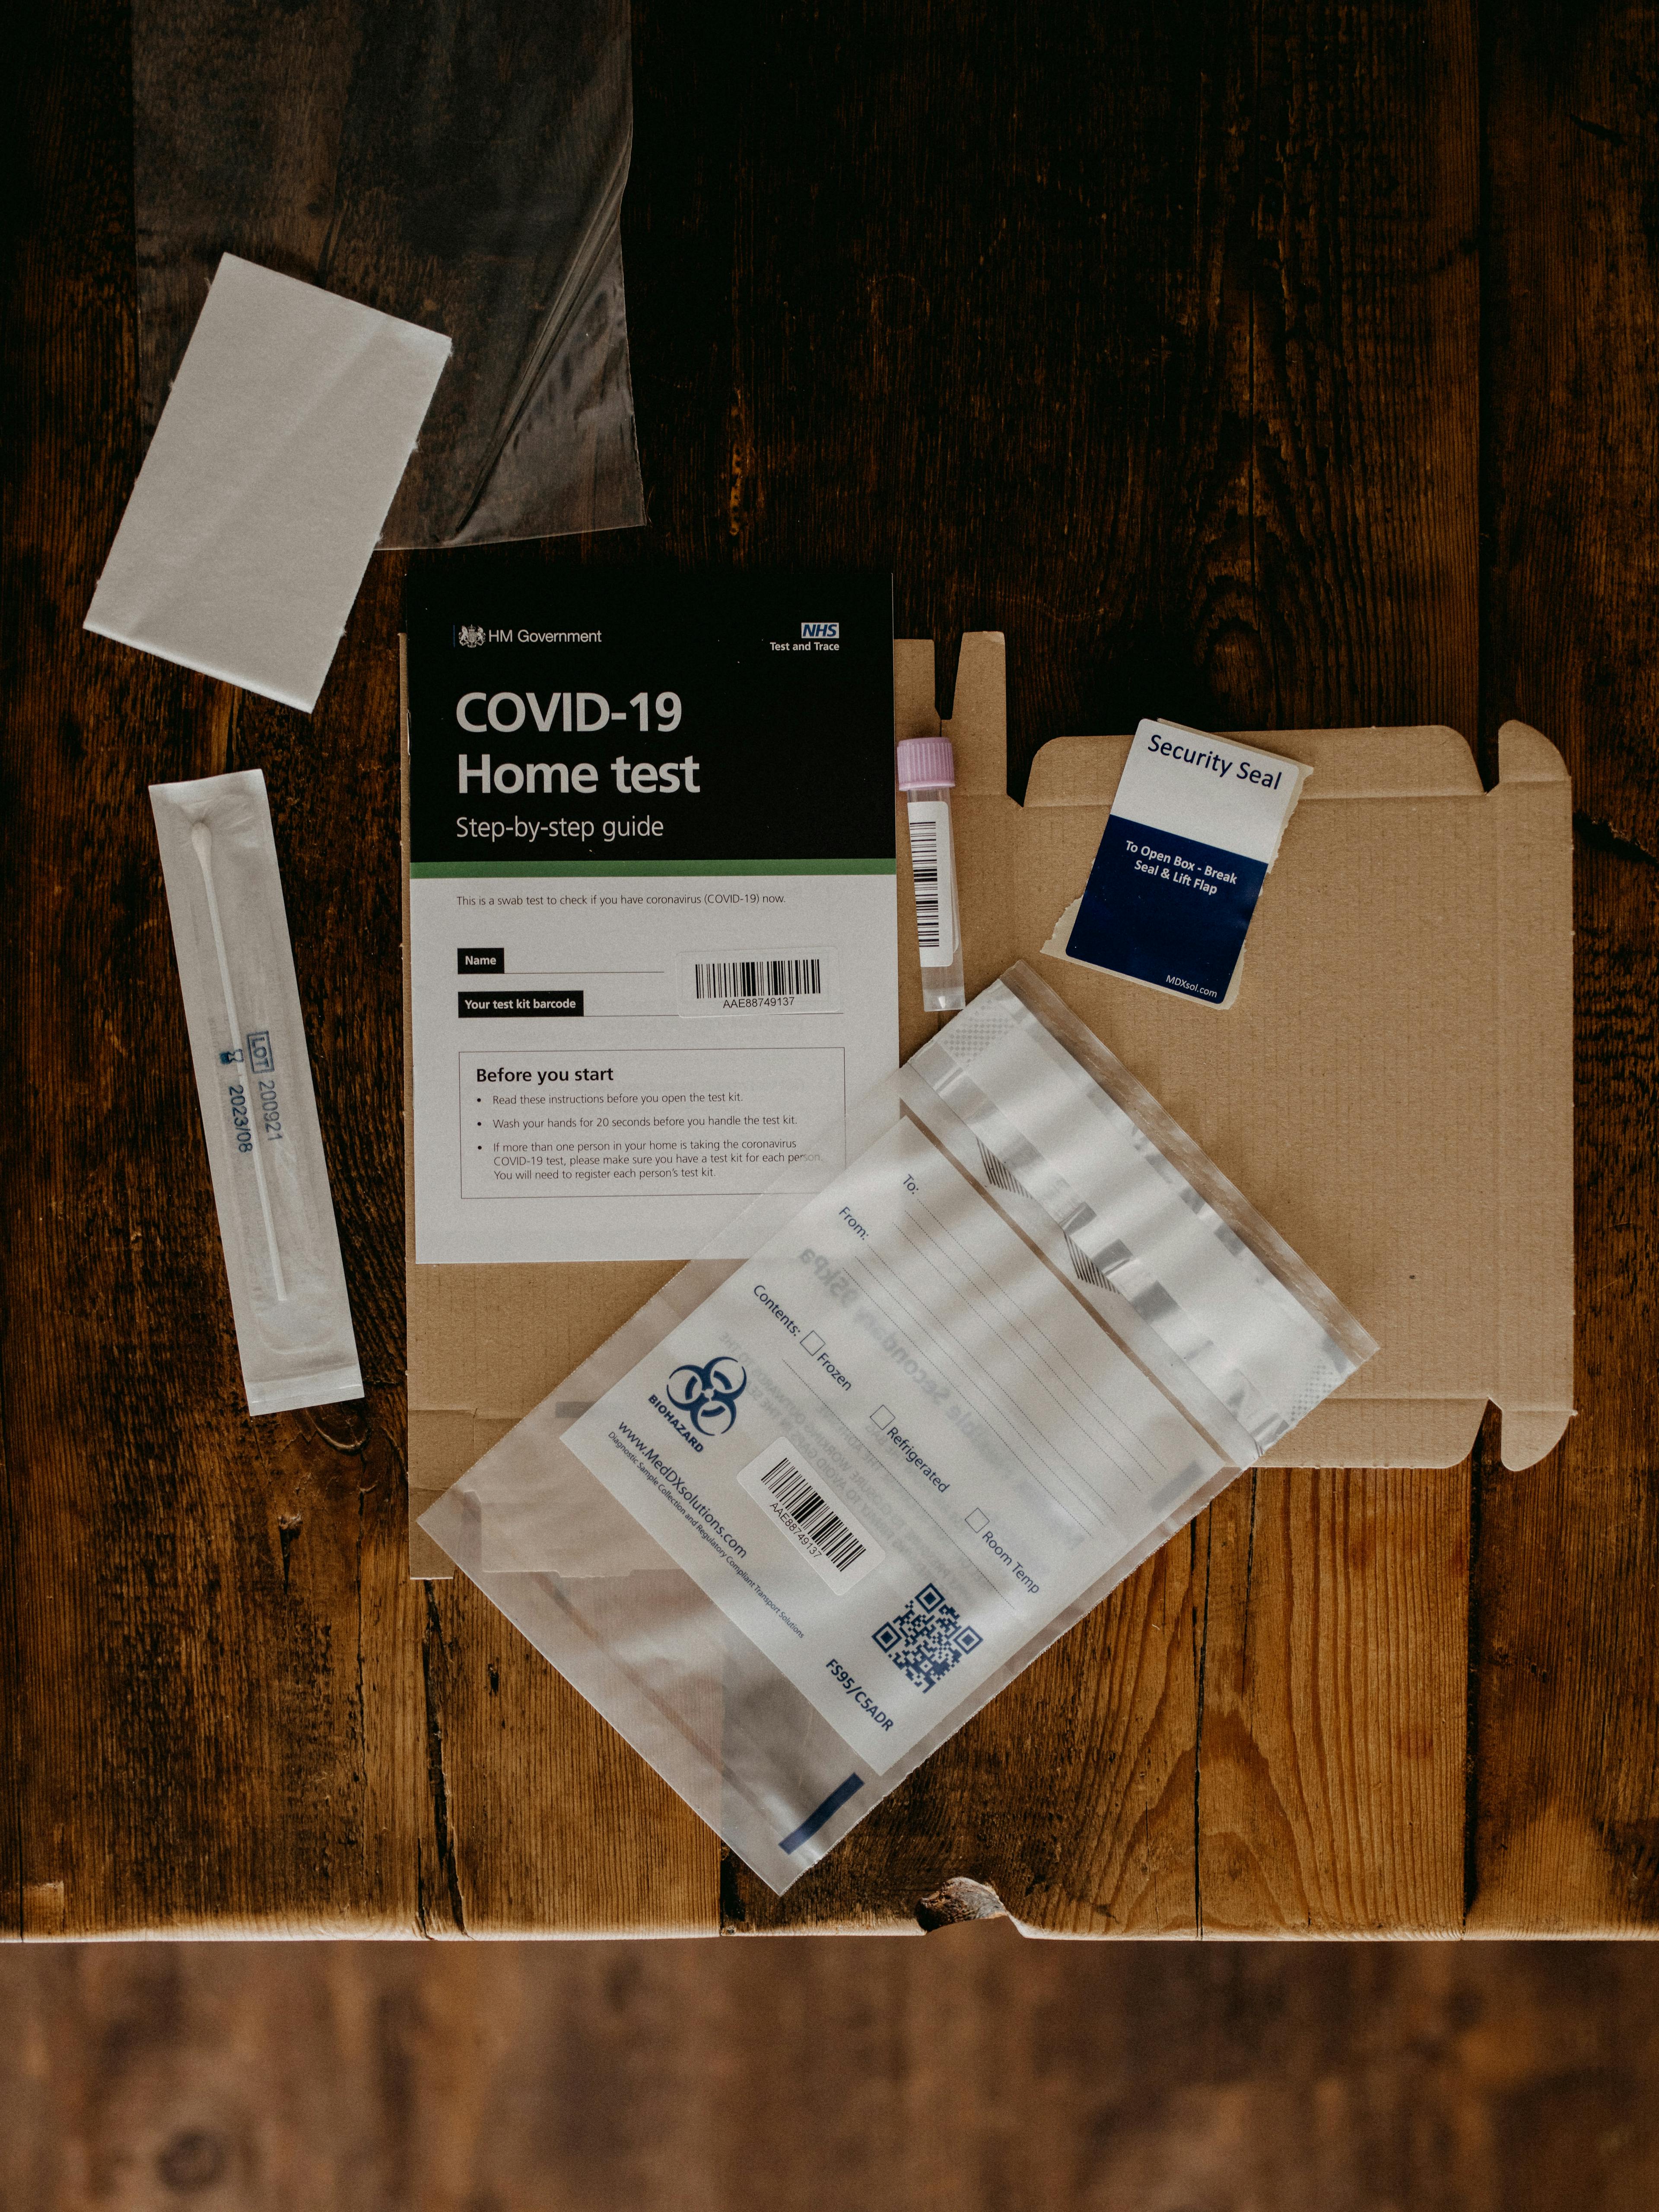 Covid-19 Home Test kit